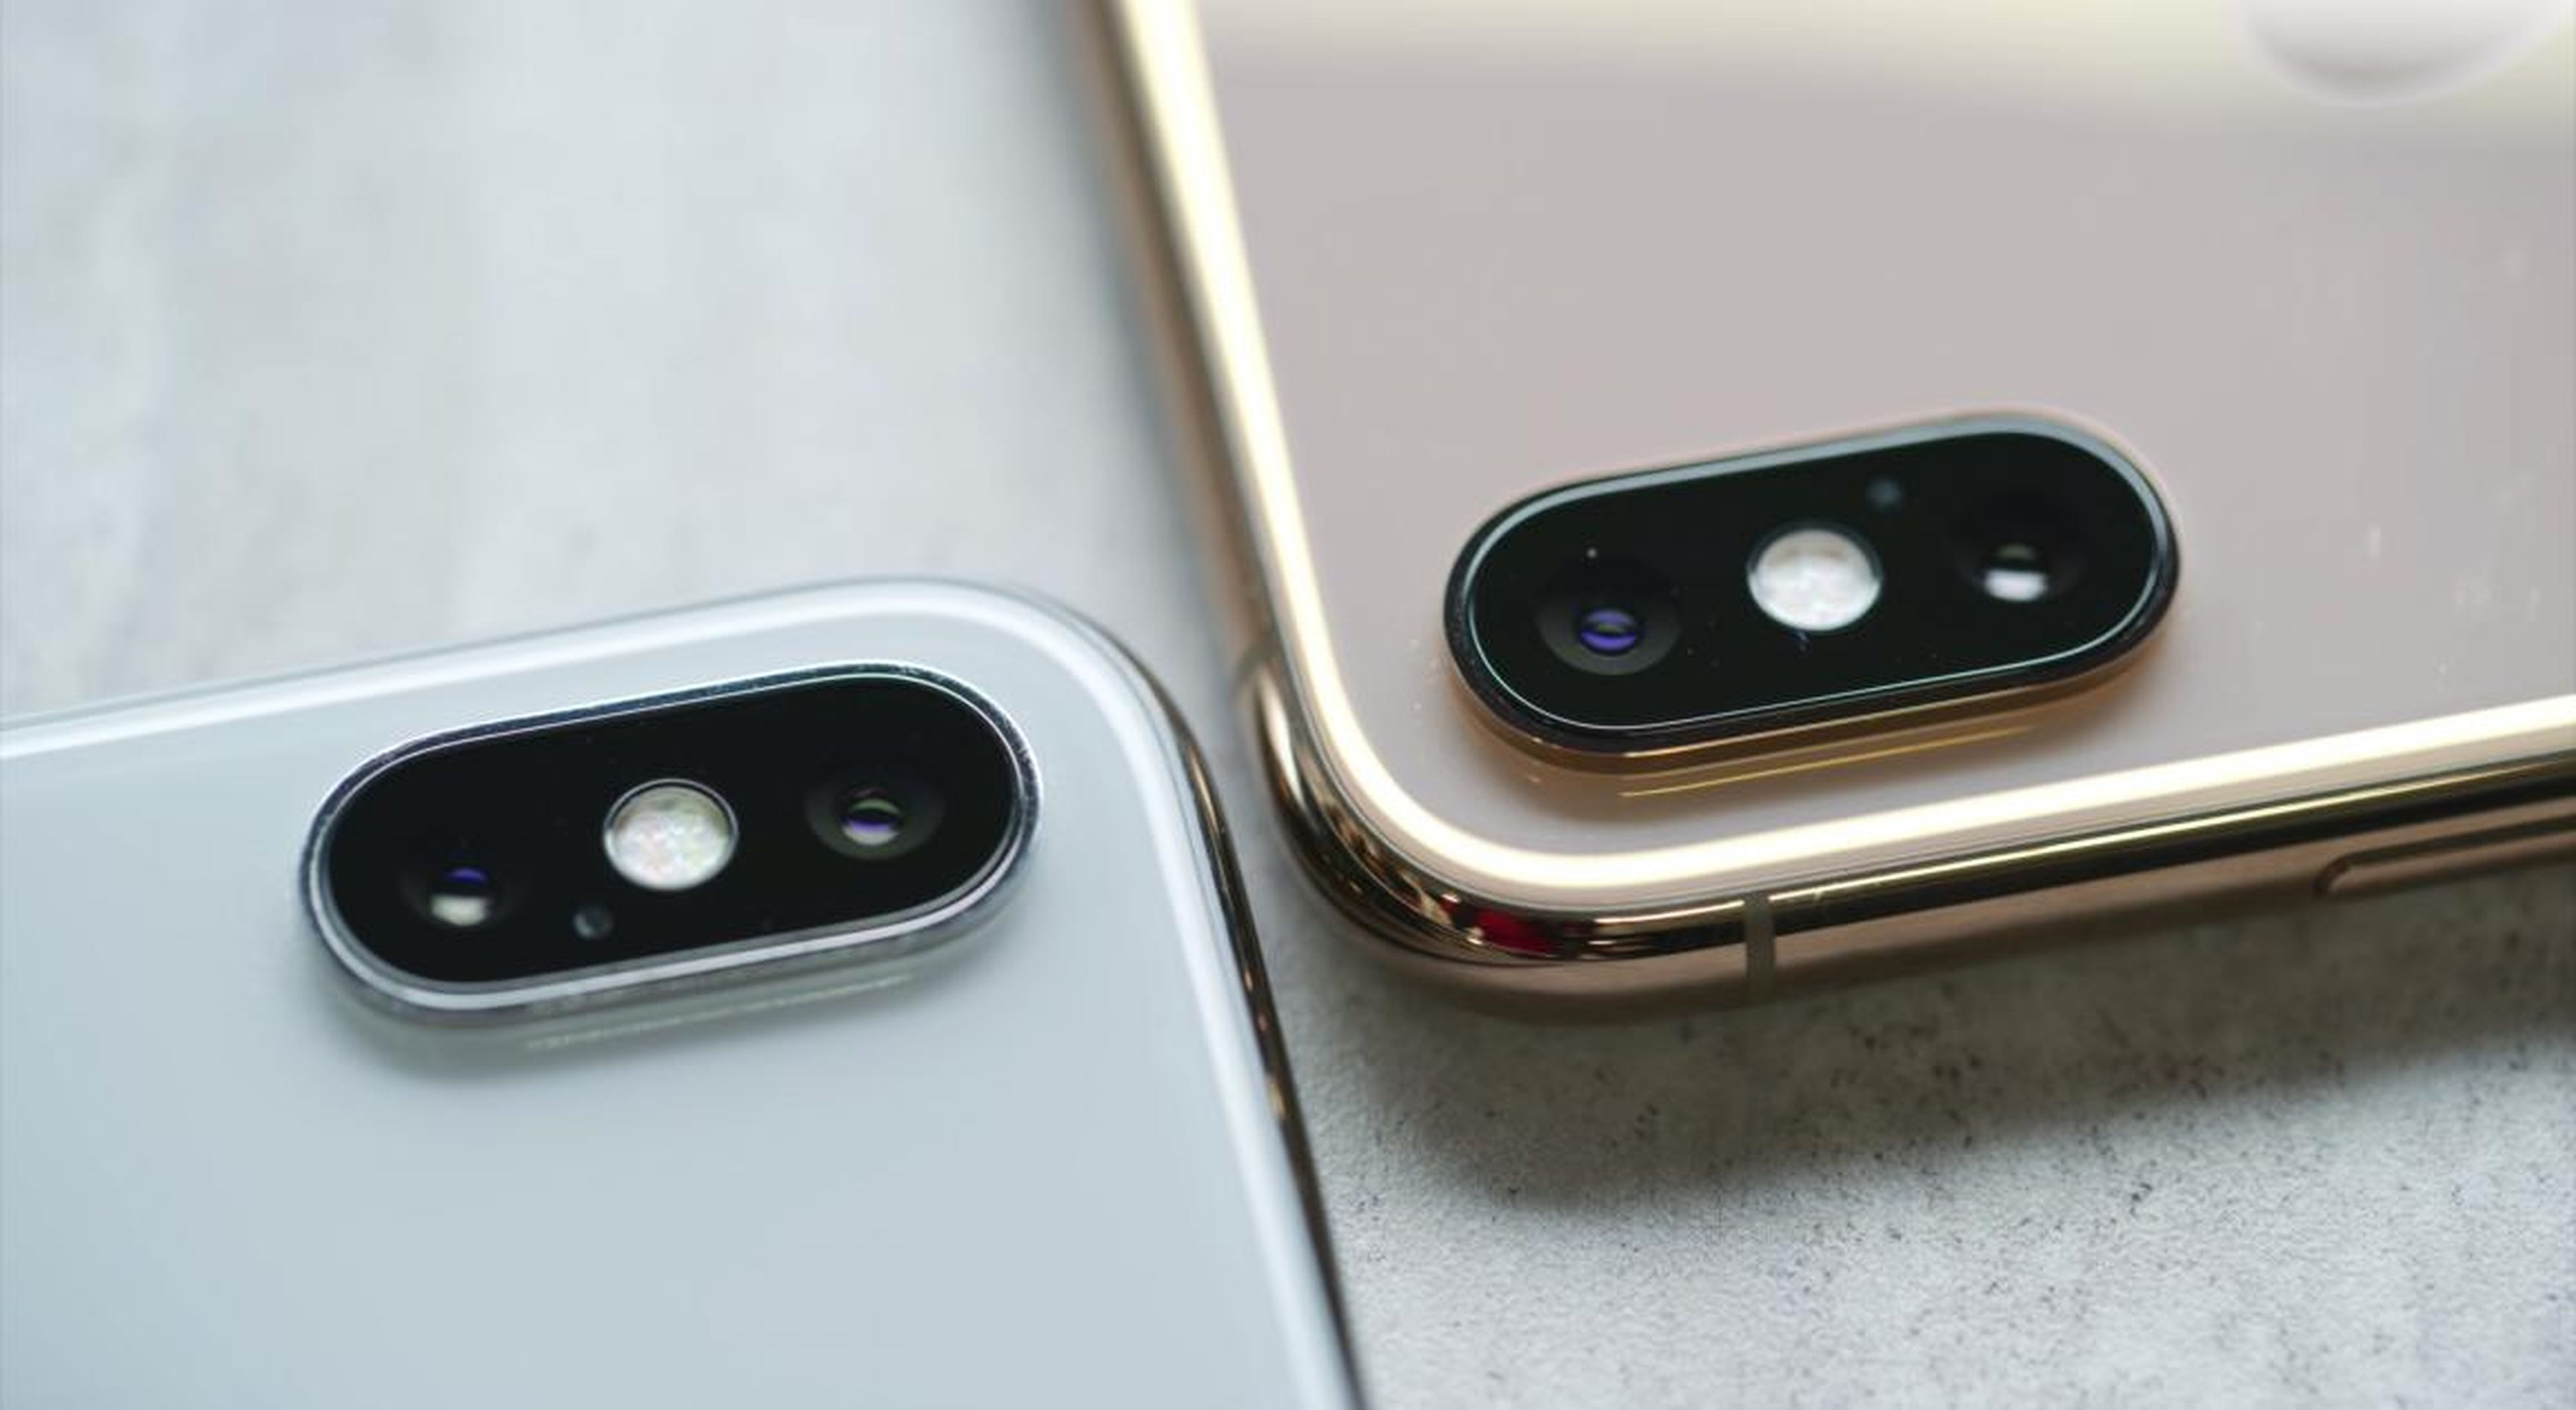 4. The iPhone XR is available in six beautiful colors, but if you want silver or gold, those are only available on the iPhone XS.